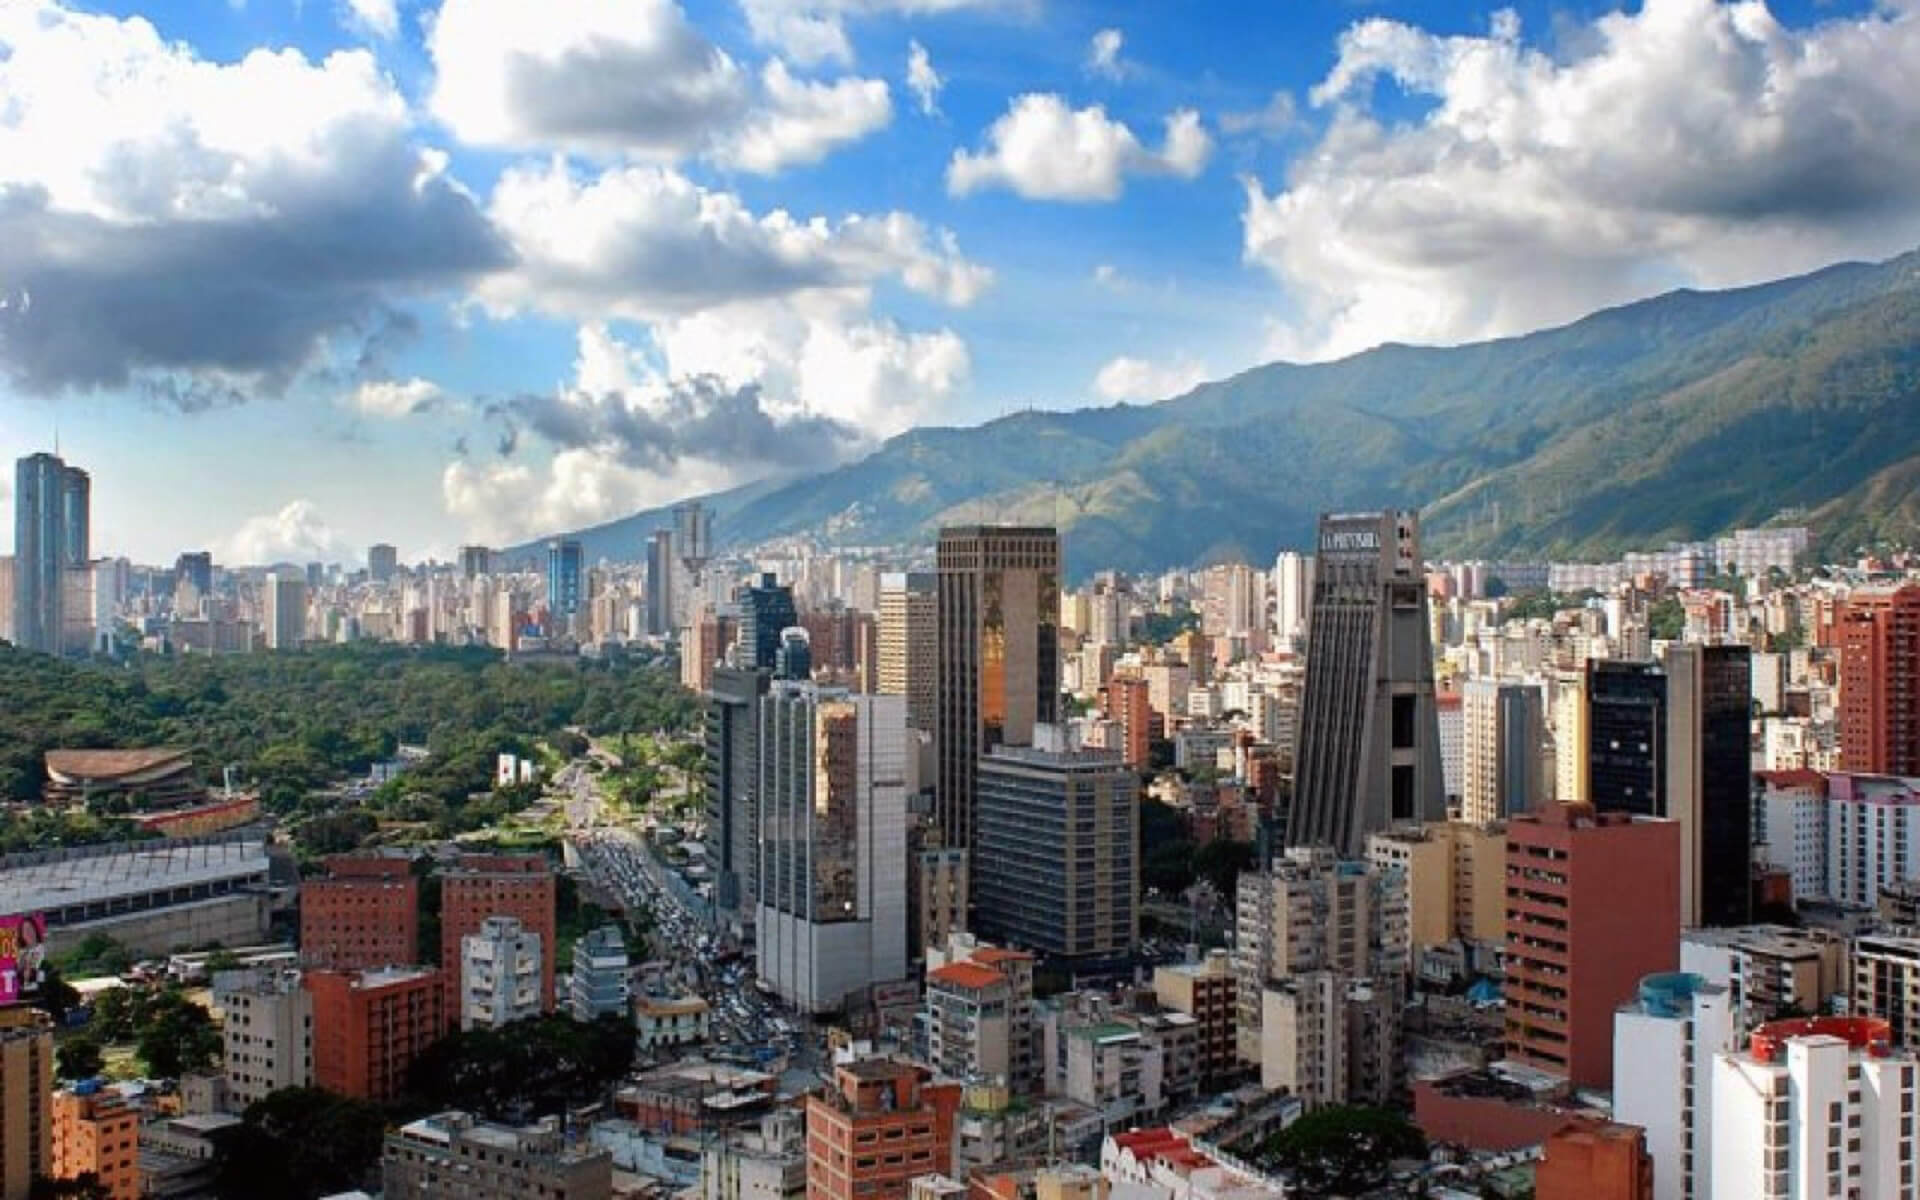 Caracas Wallpapers (27+ images inside)